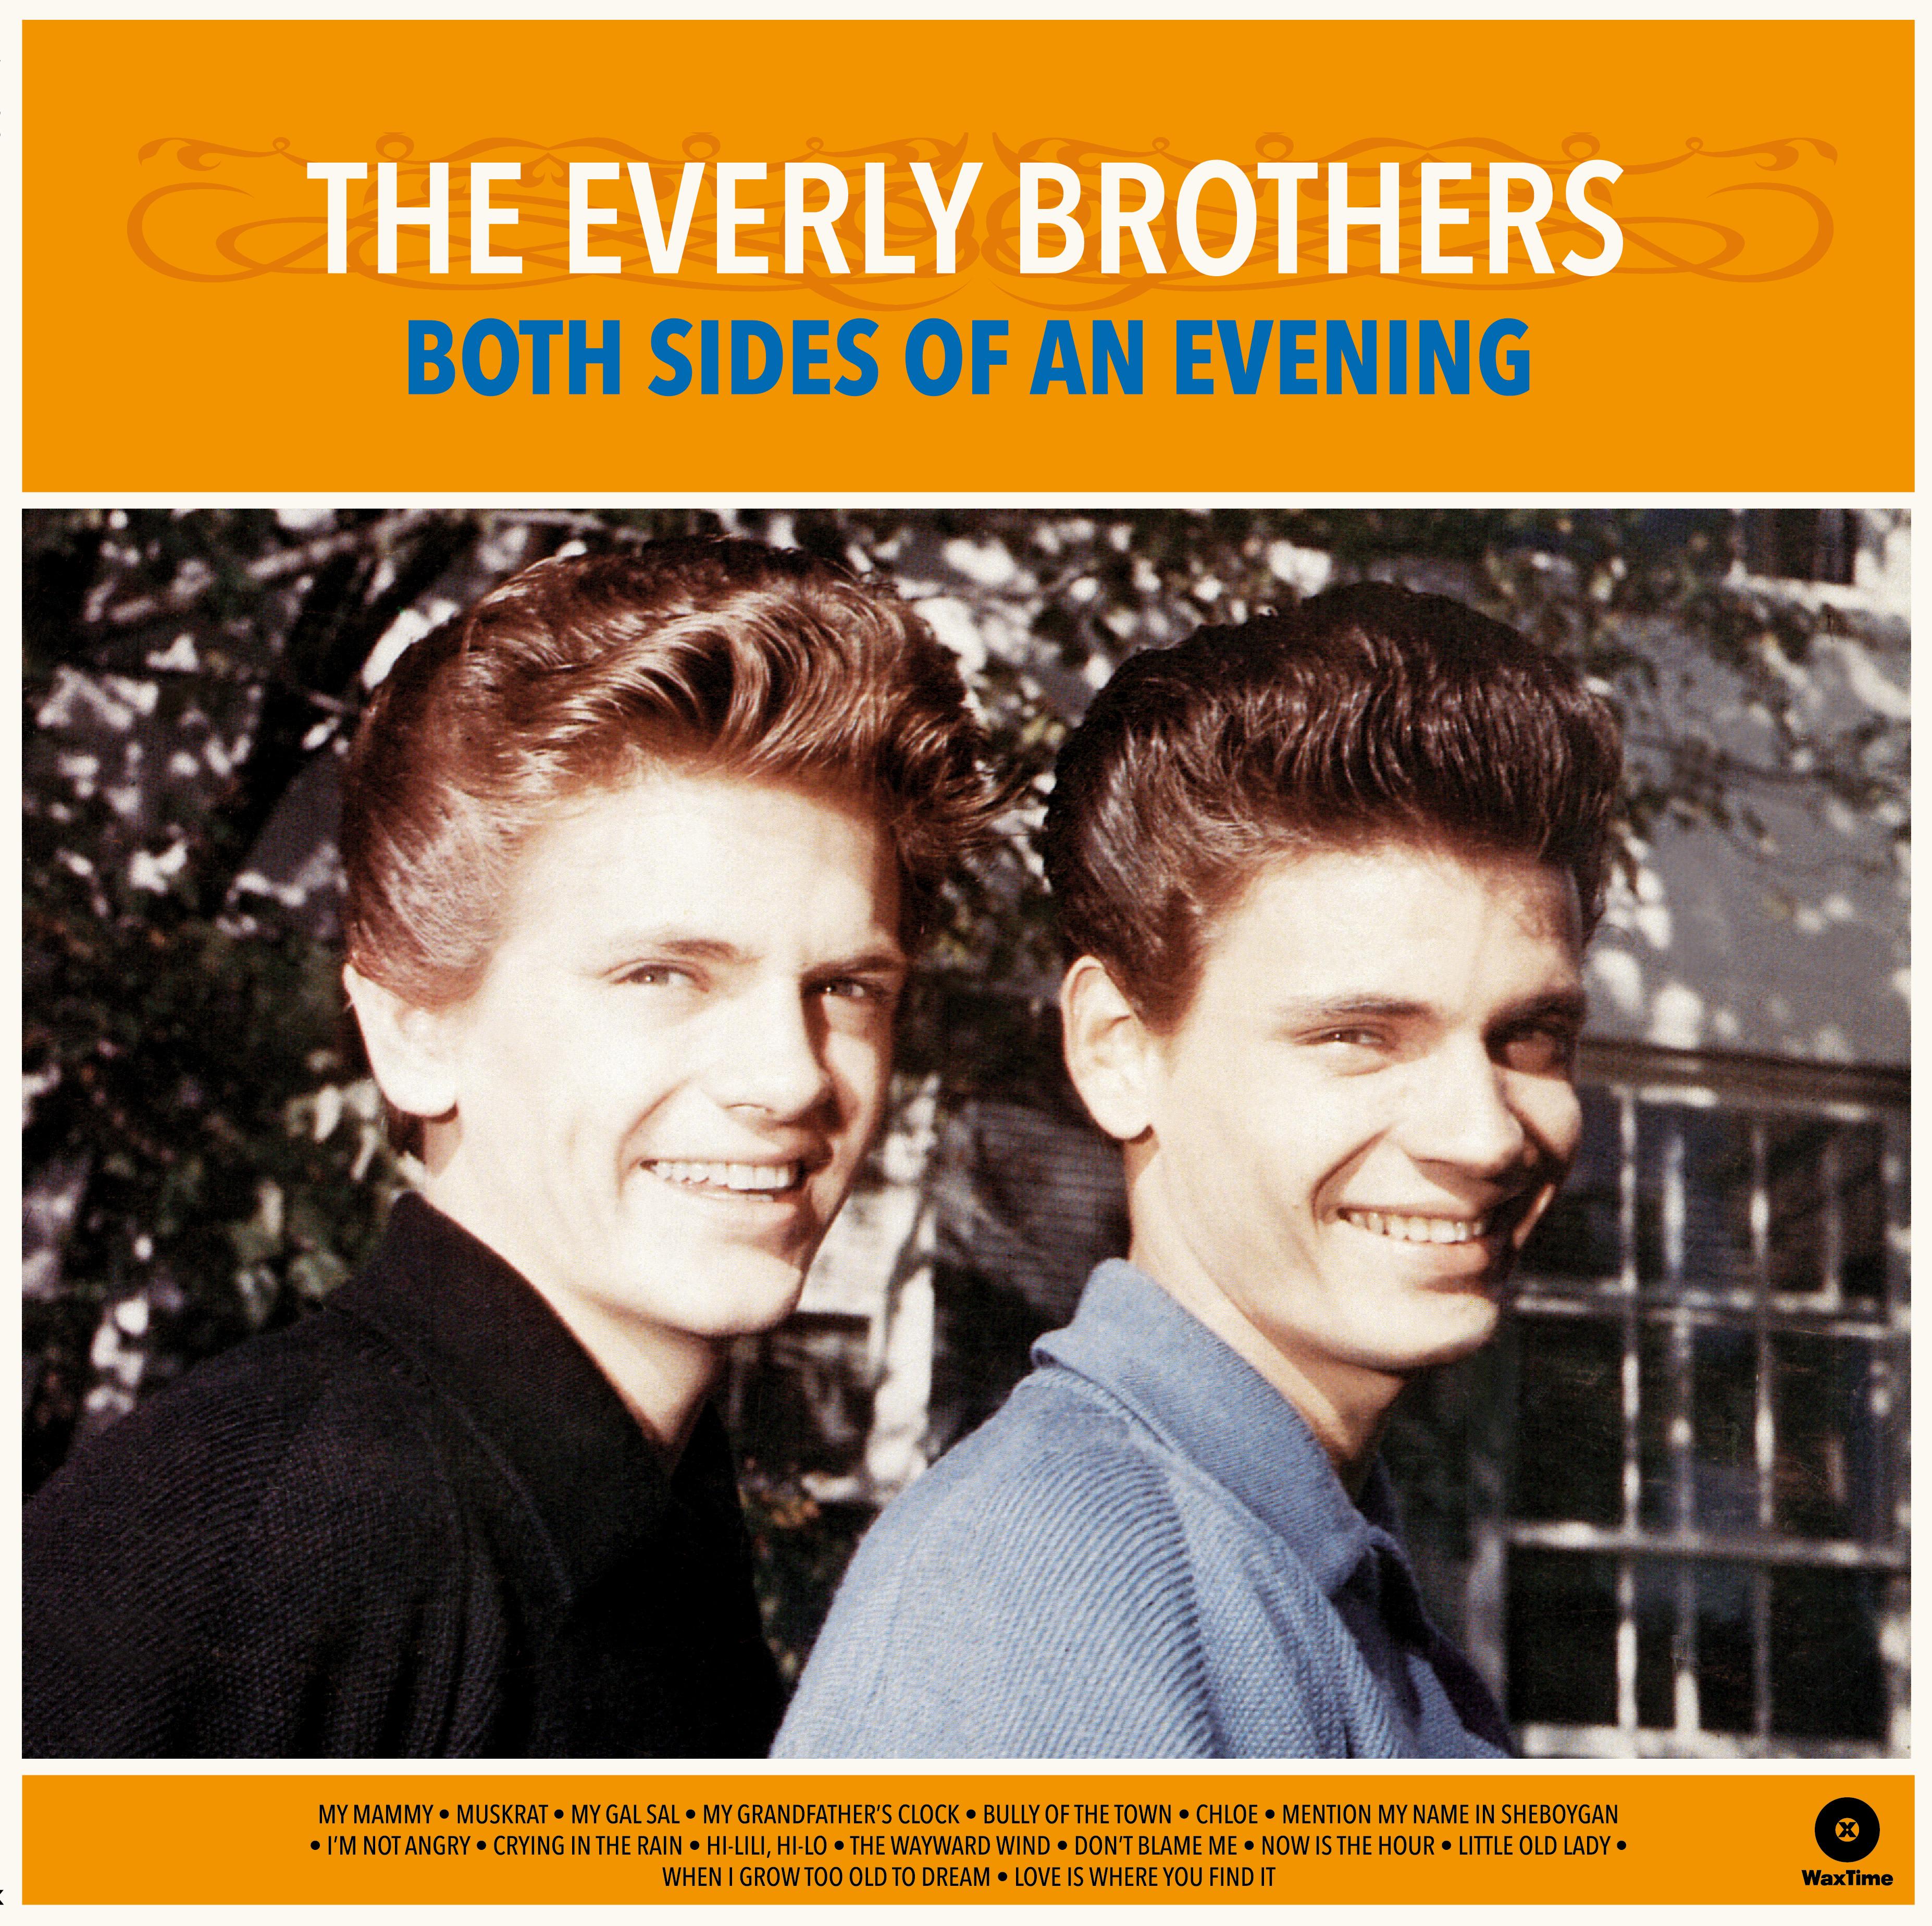 The Everly Brothers - Both Sides Of An Evening [Lp] - Foto 1 di 1